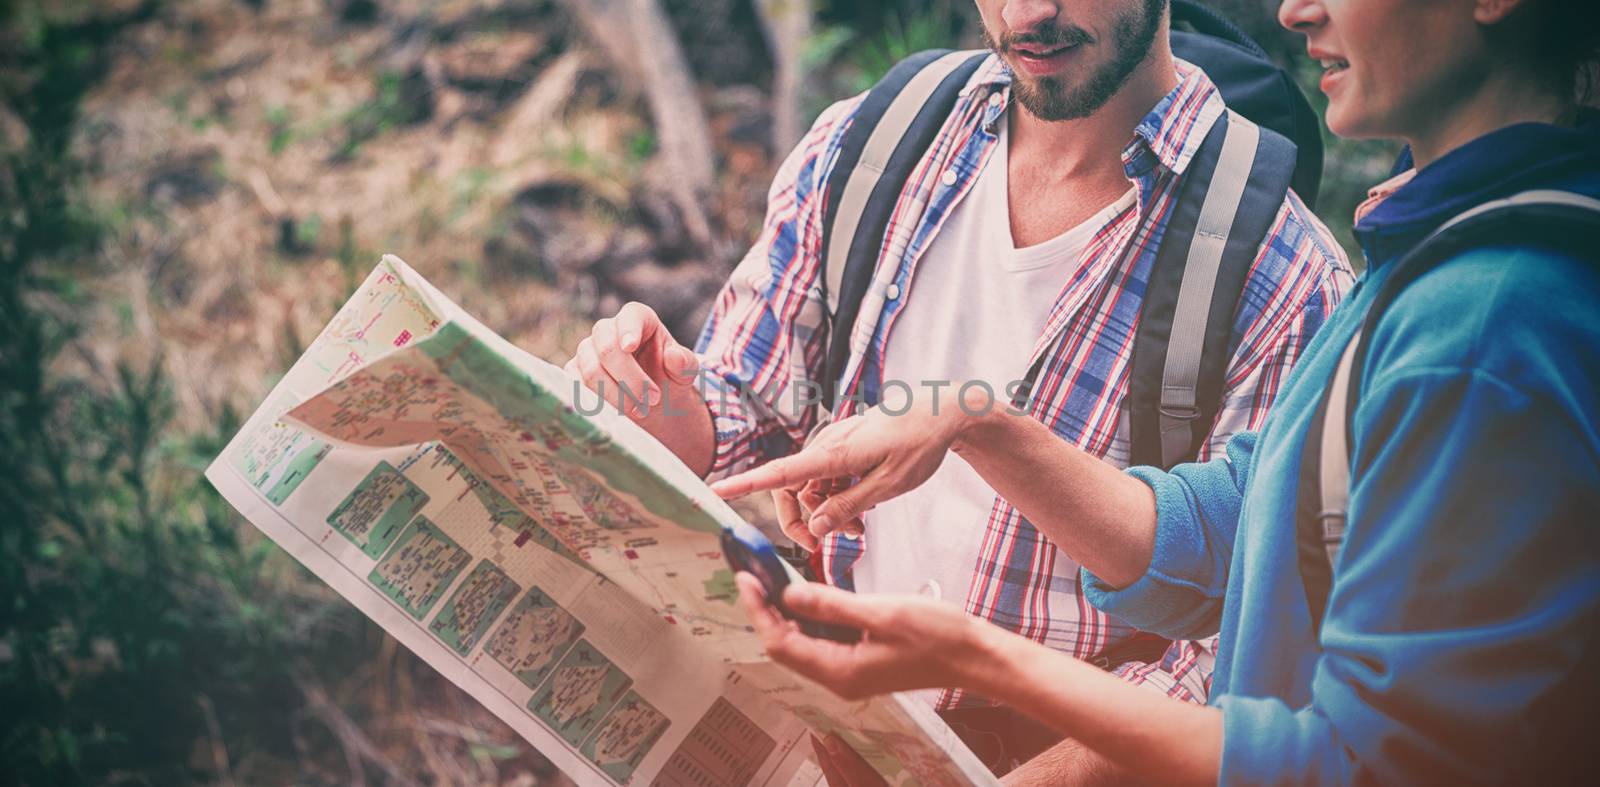 Young couple discussing over map in forest